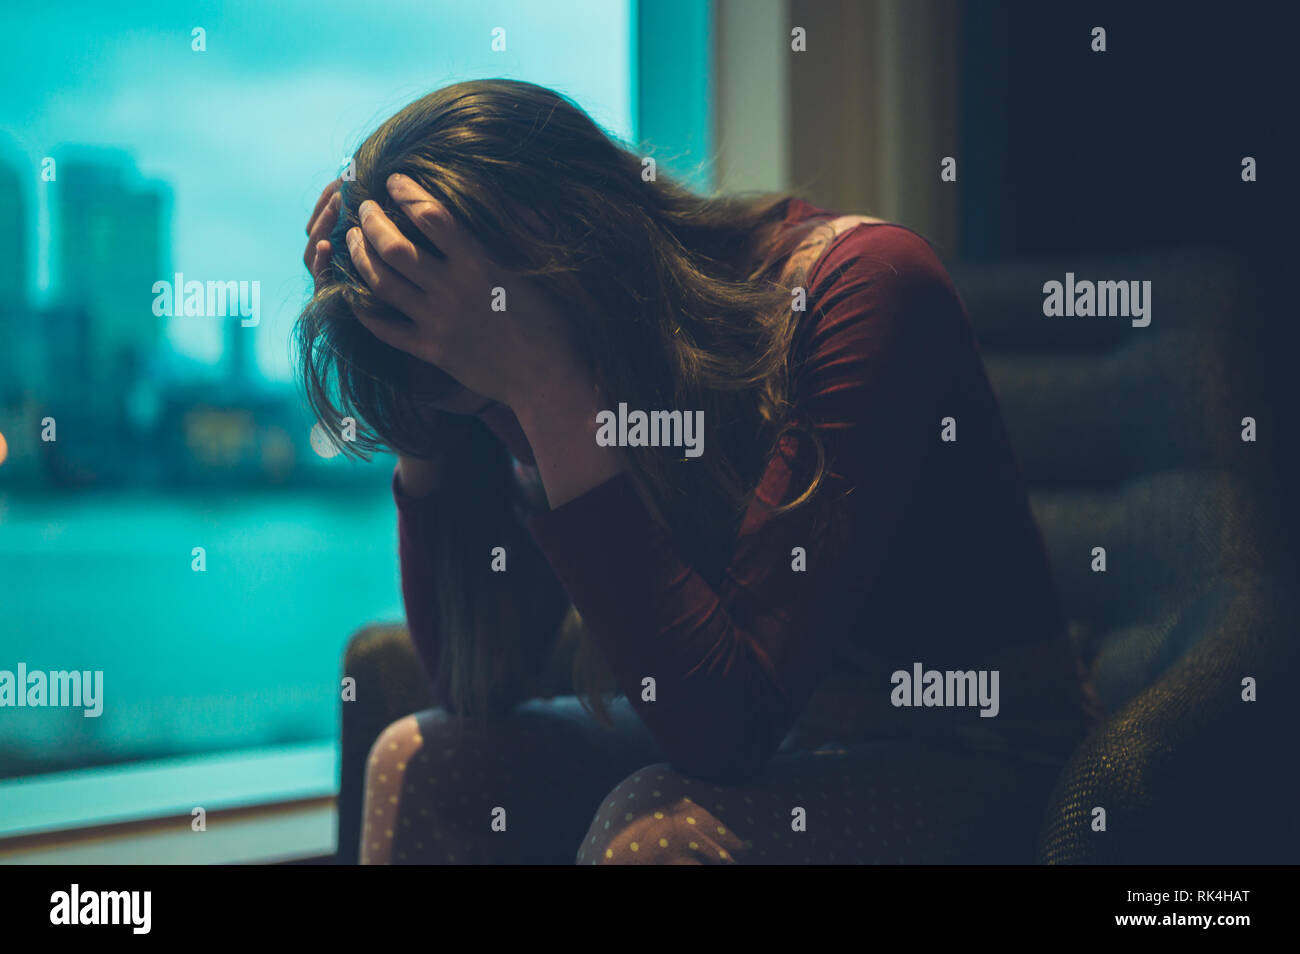 A sad woman is sitting by the window in a city Stock Photo